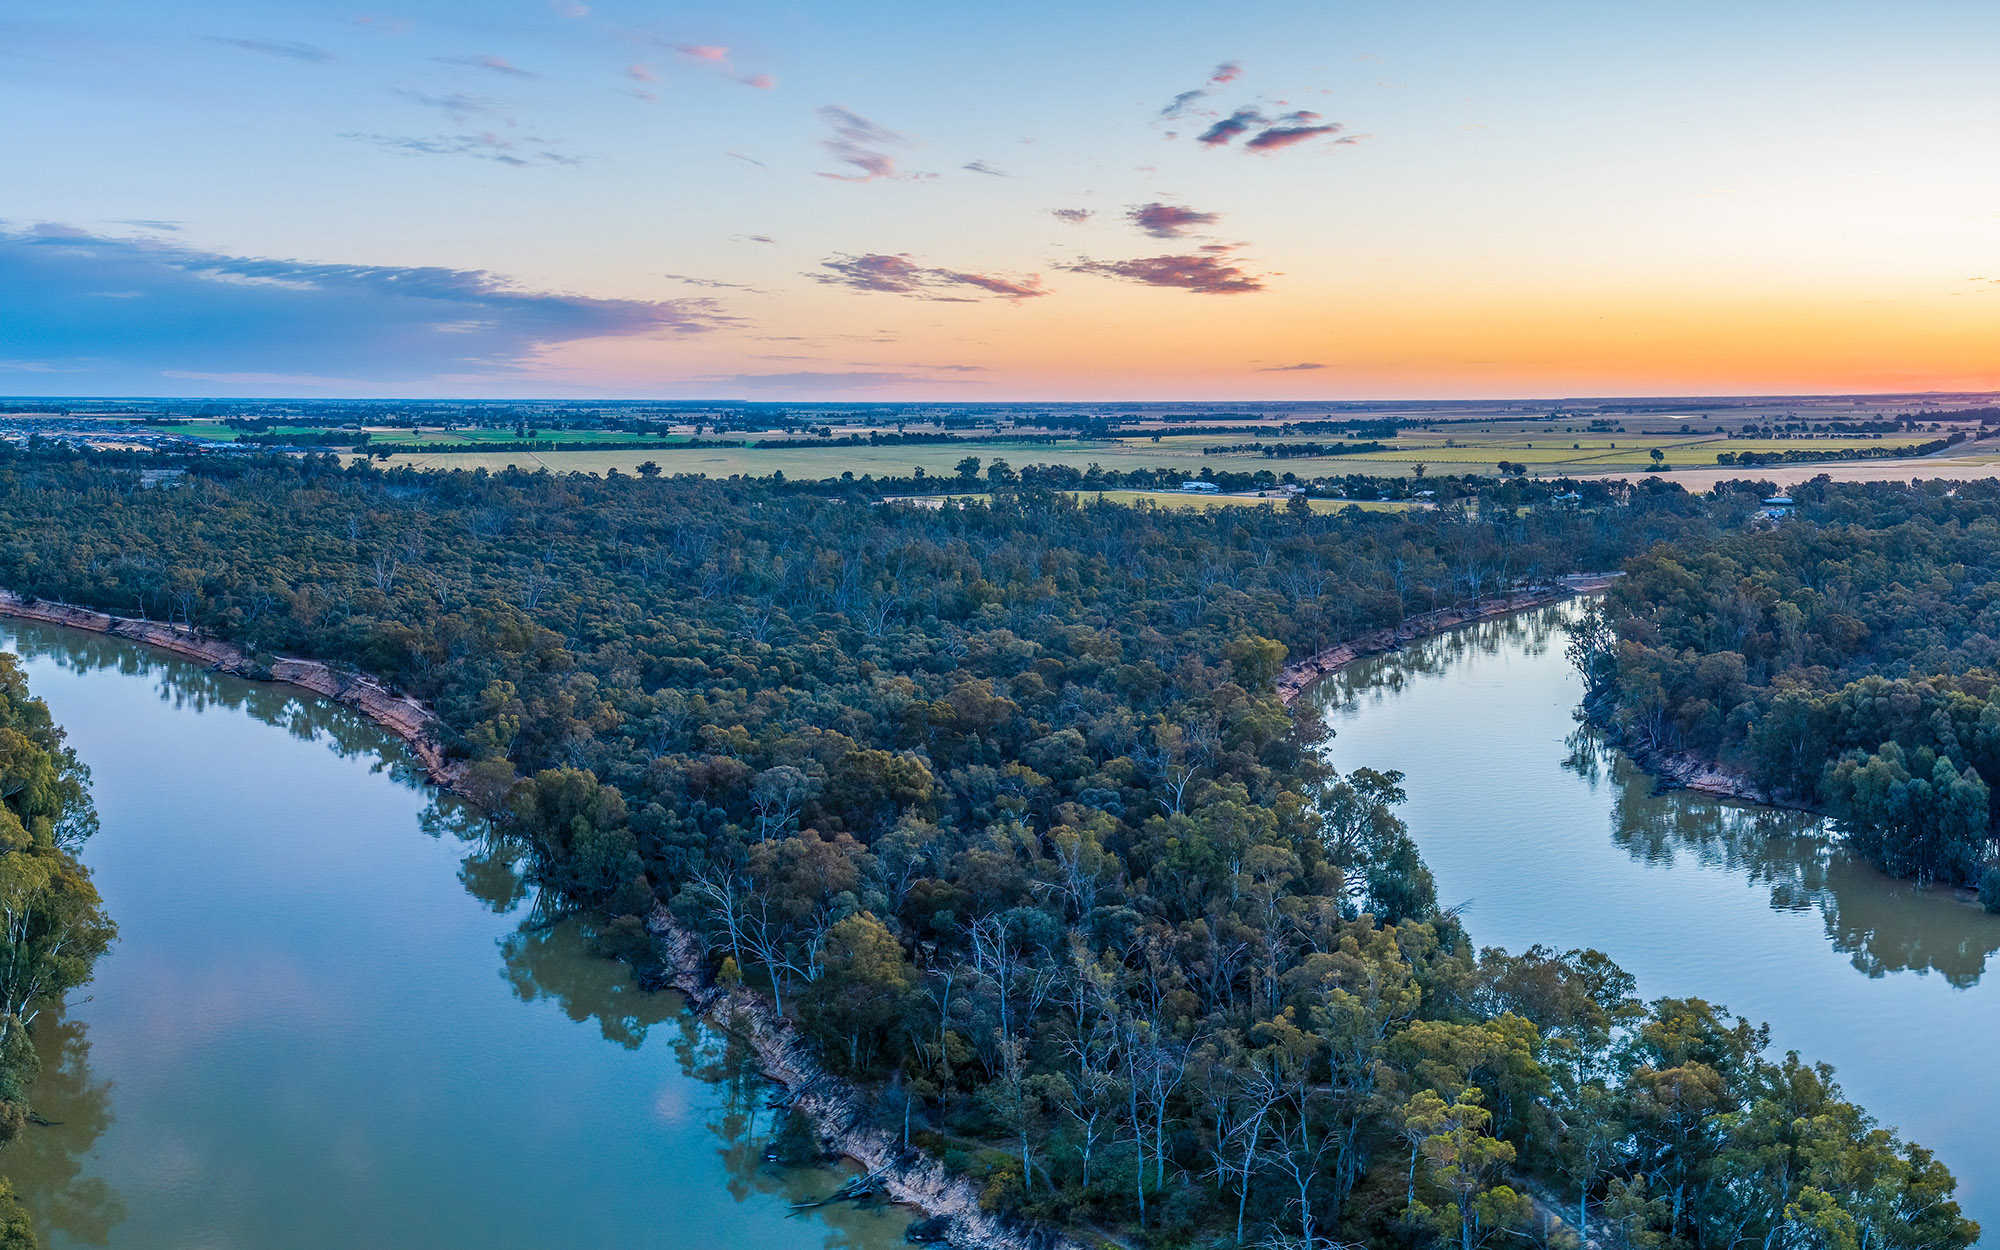 Panoramic view of the Murray River in New South Wales.